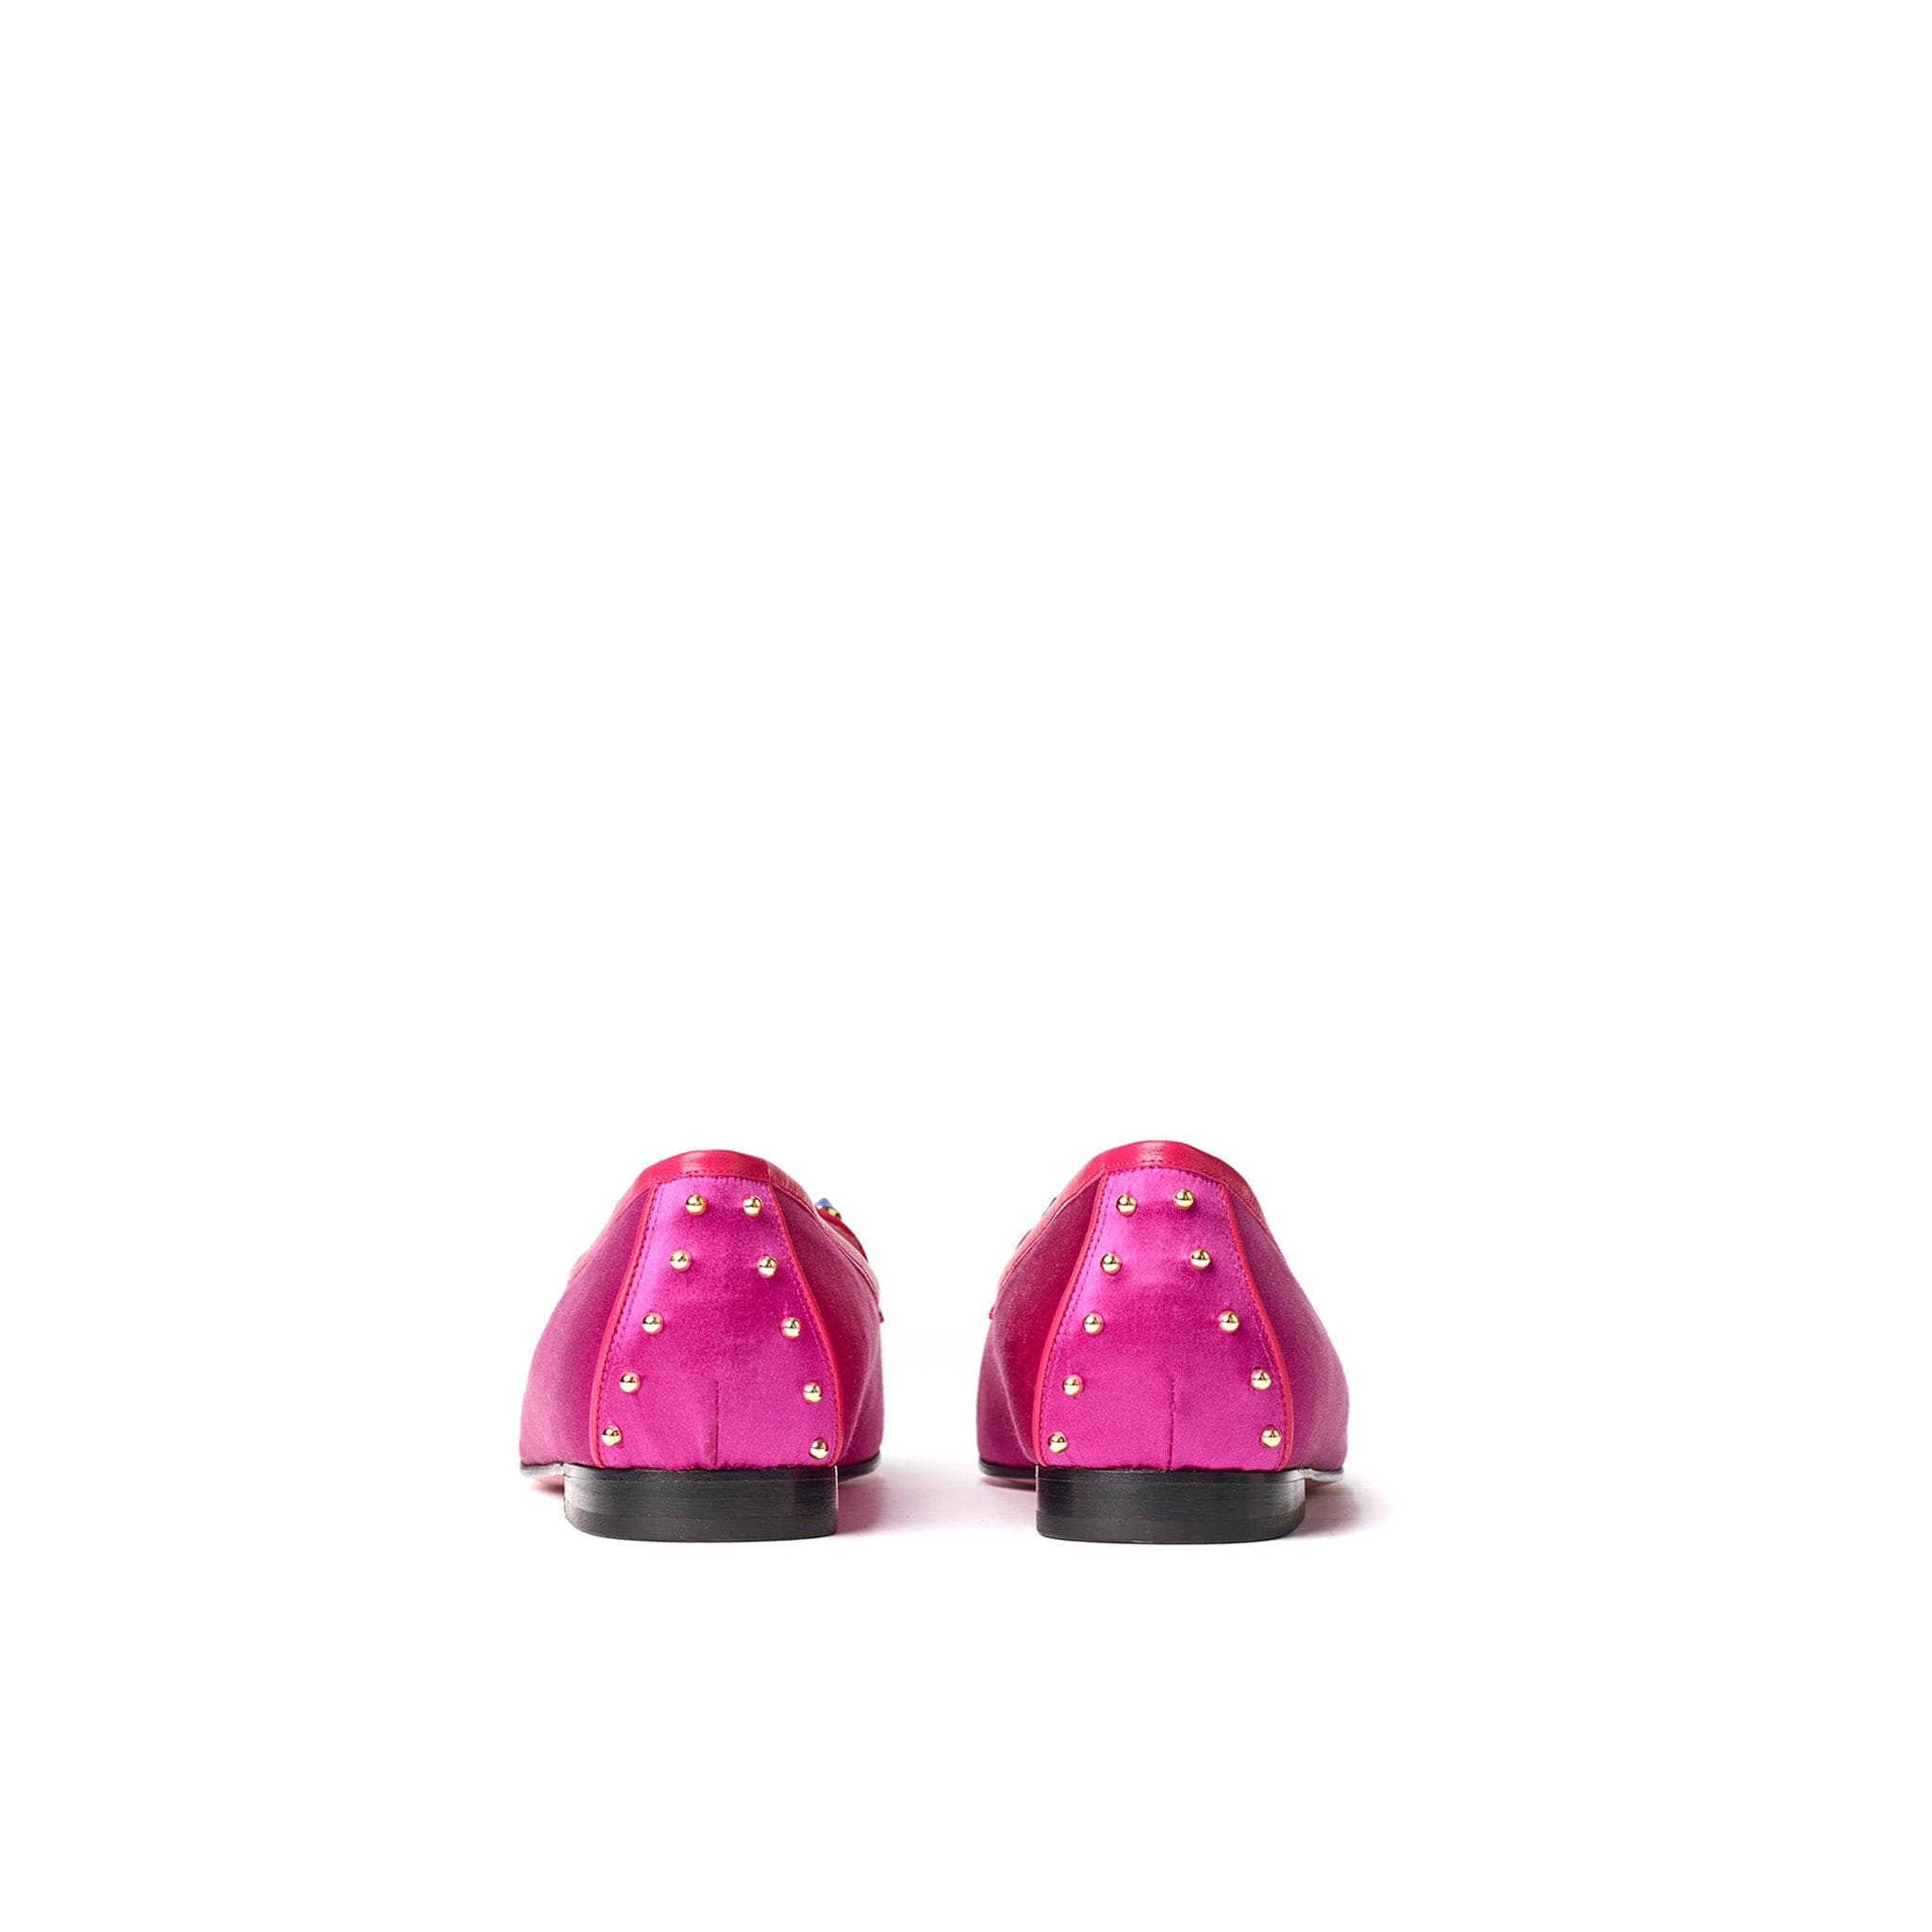 Phare Studded loafer in magenta silk satin with blue and gold studs top view 